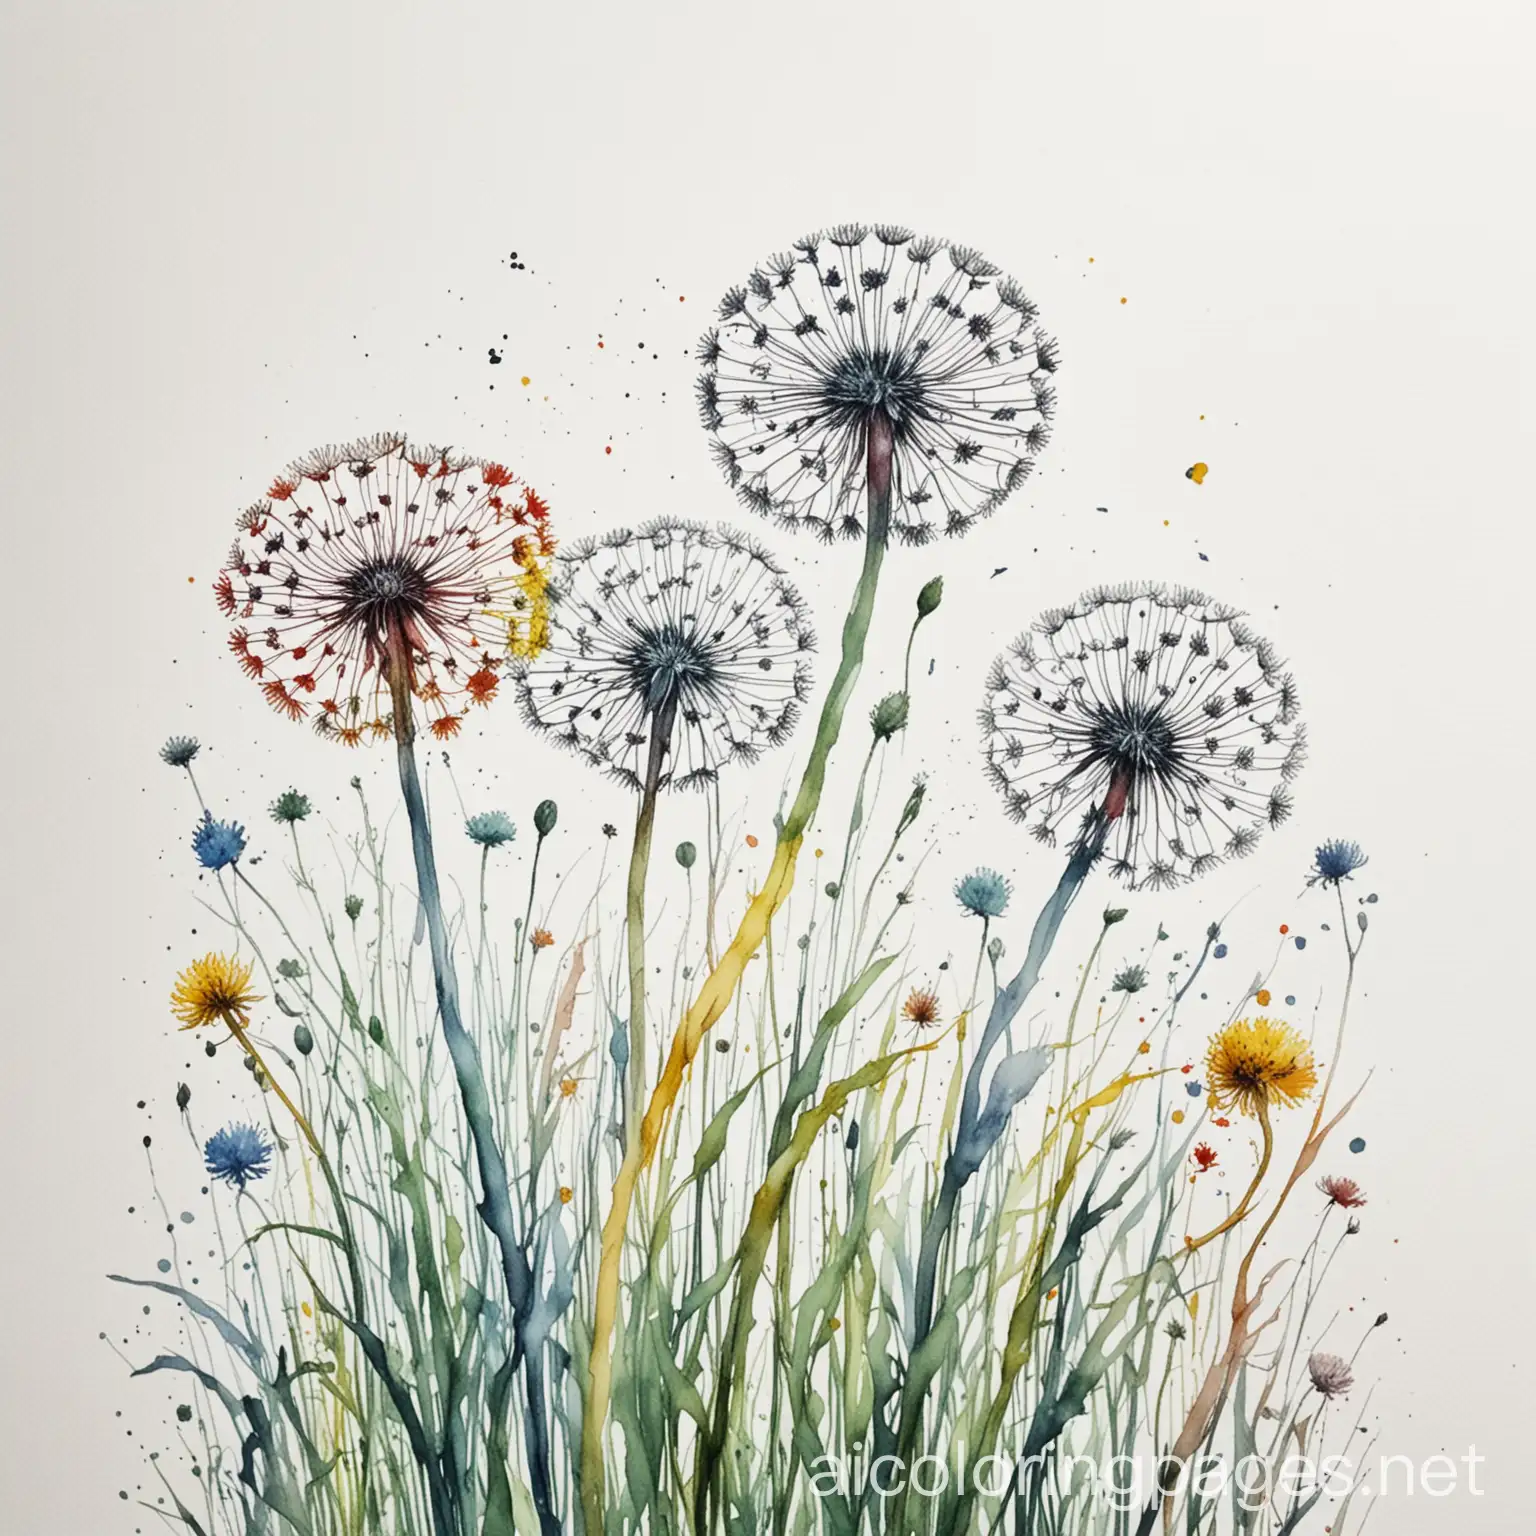 red, green, blue, yellow color dandelions in a field watercolor painting, Coloring Page, black and white, line art, white background, Simplicity, Ample White Space